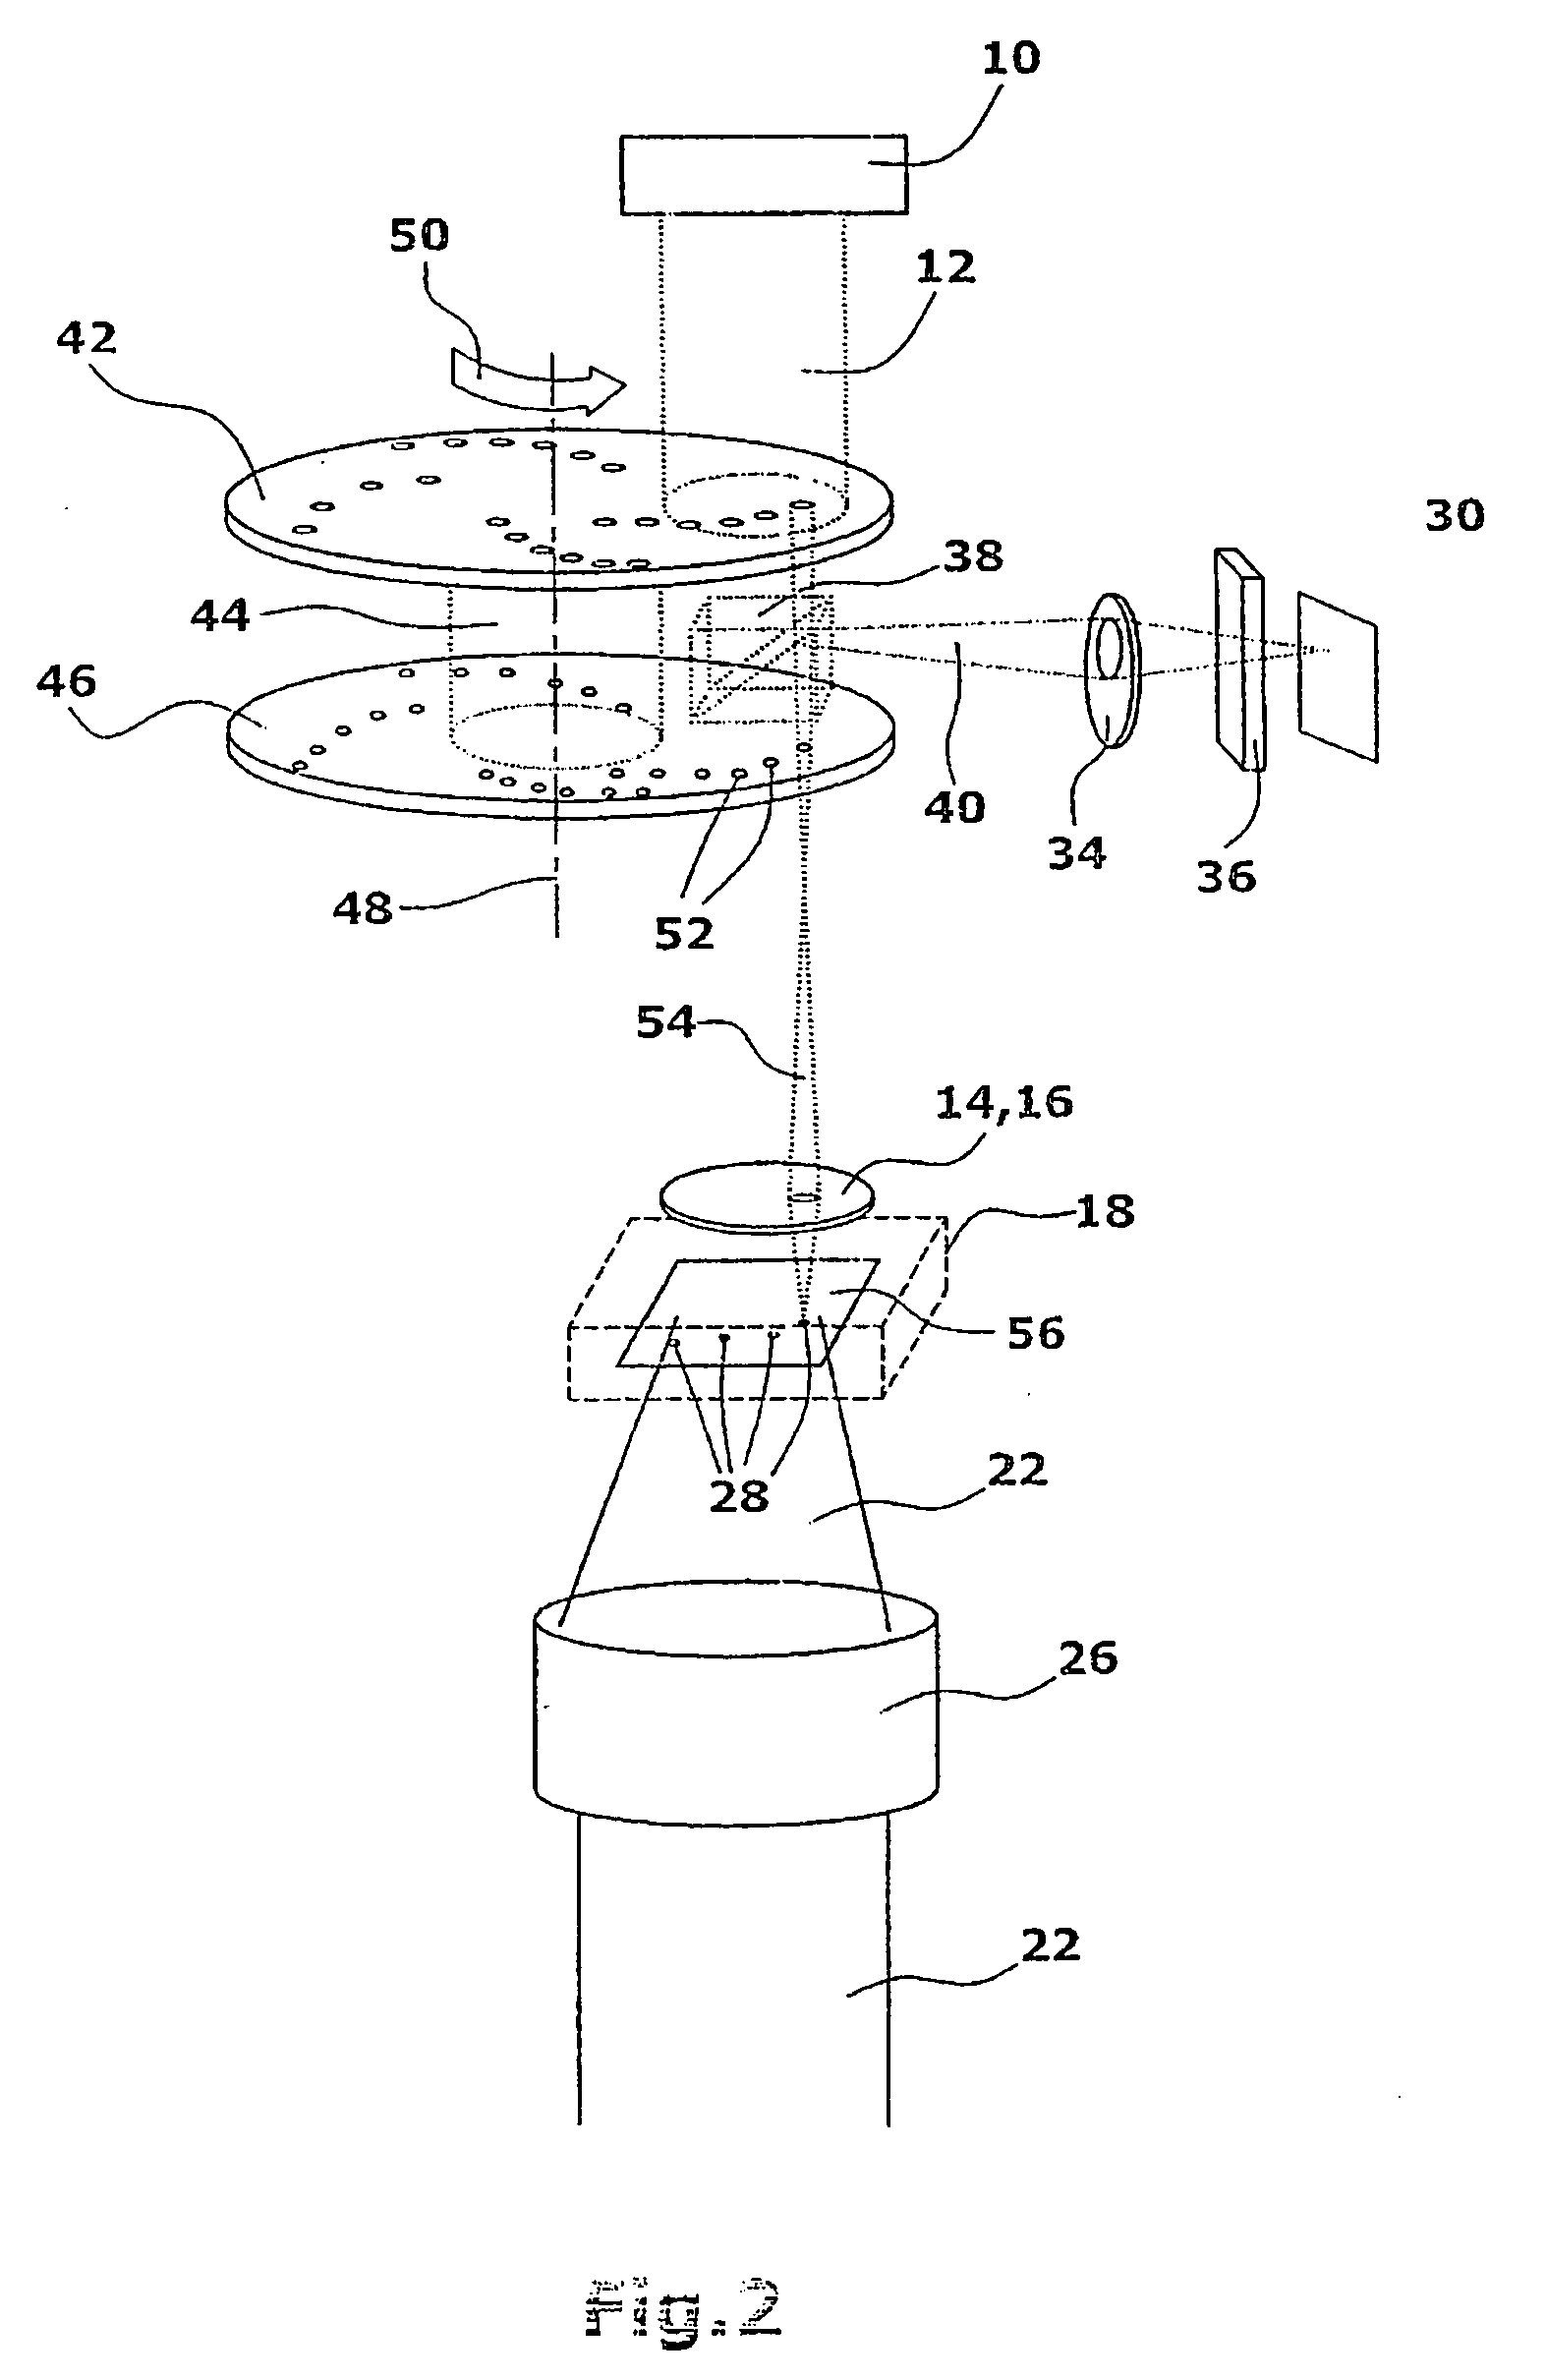 Device and method for measuring the optical properties of an object